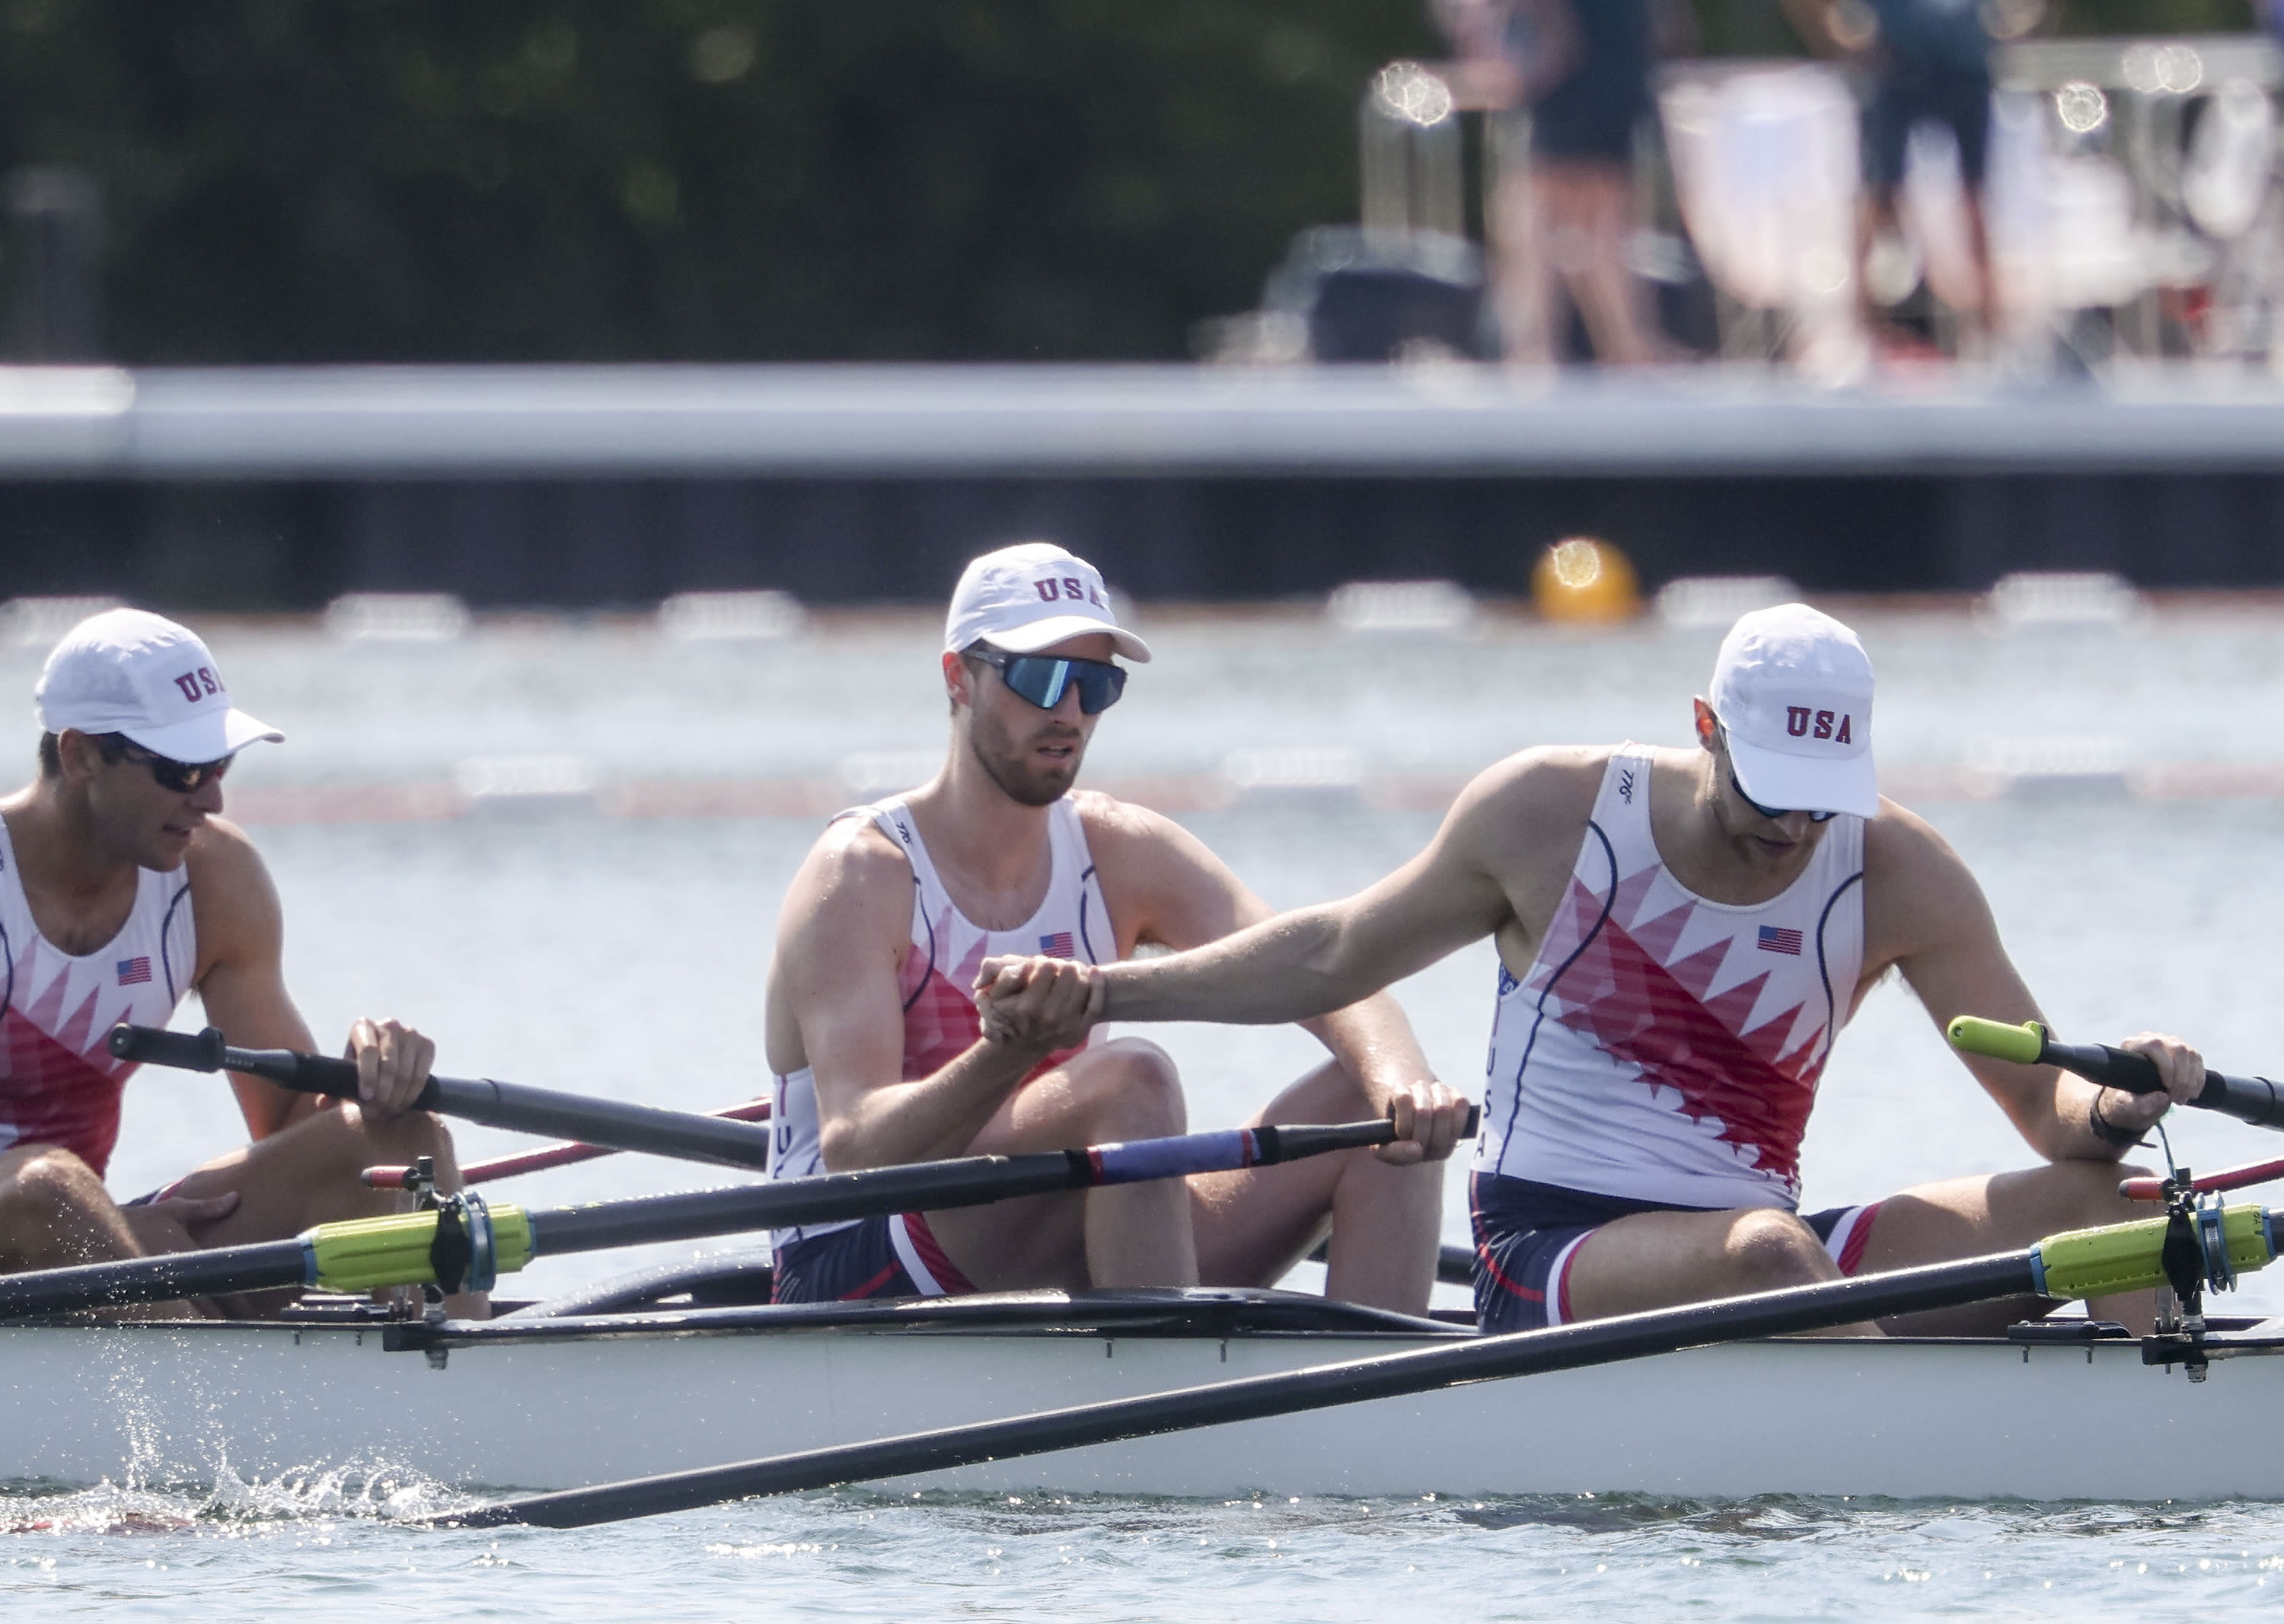 The hardest-working boy in the boat: Peter Chatain took a high-tech job while pursuing his Olympic rowing dream